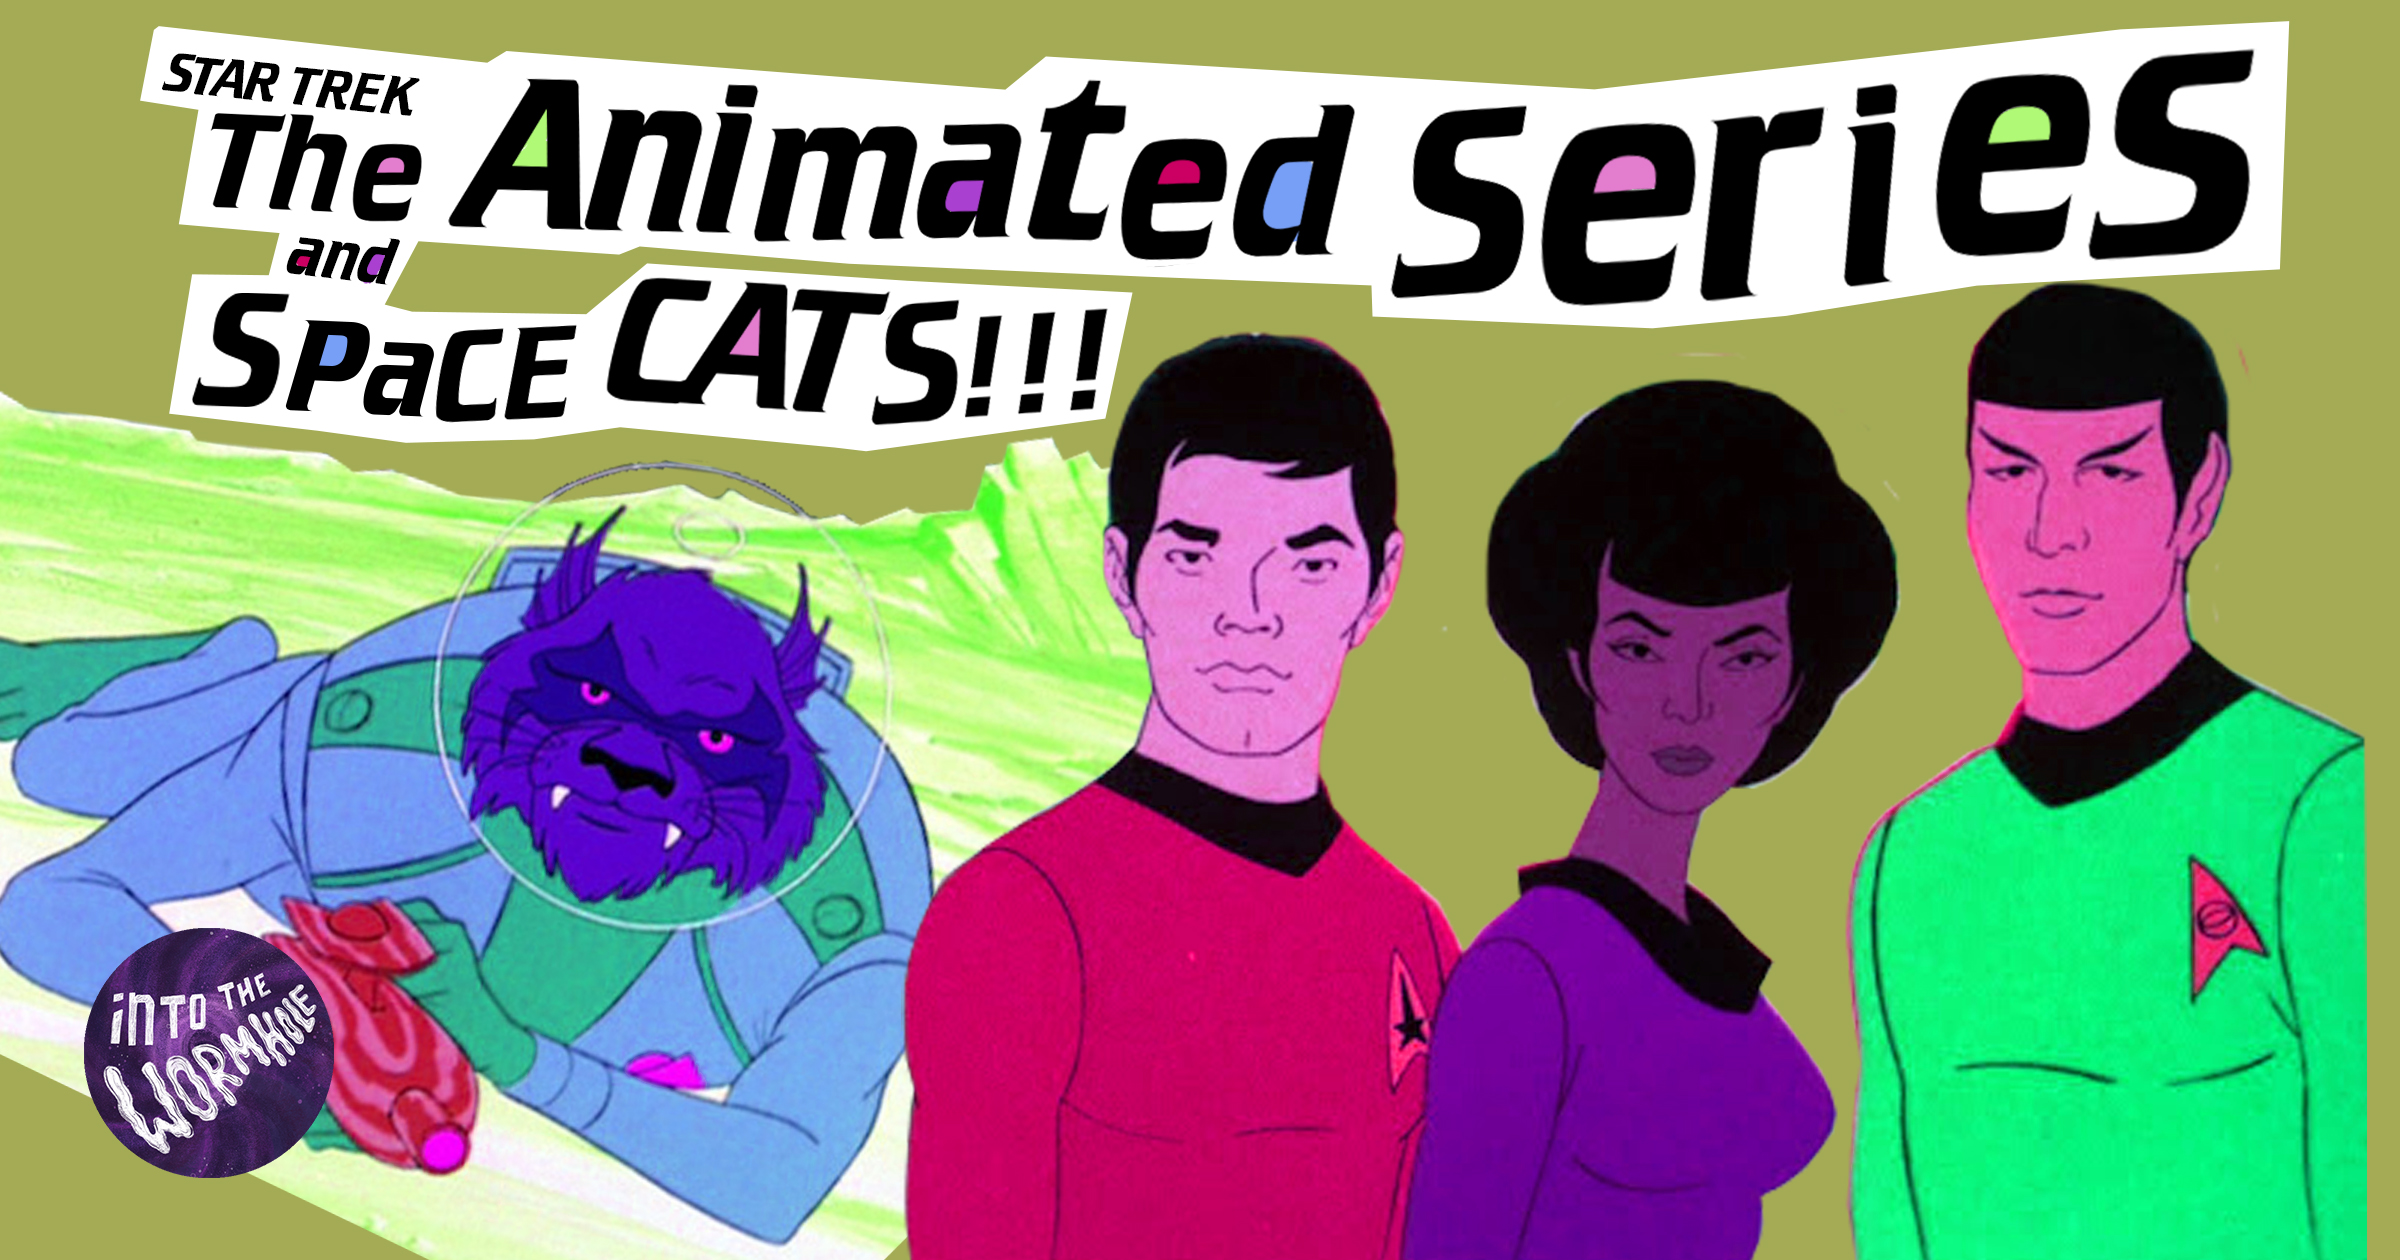 Star Trek: The Animated Series and Space Cats!!! – We Own This Town